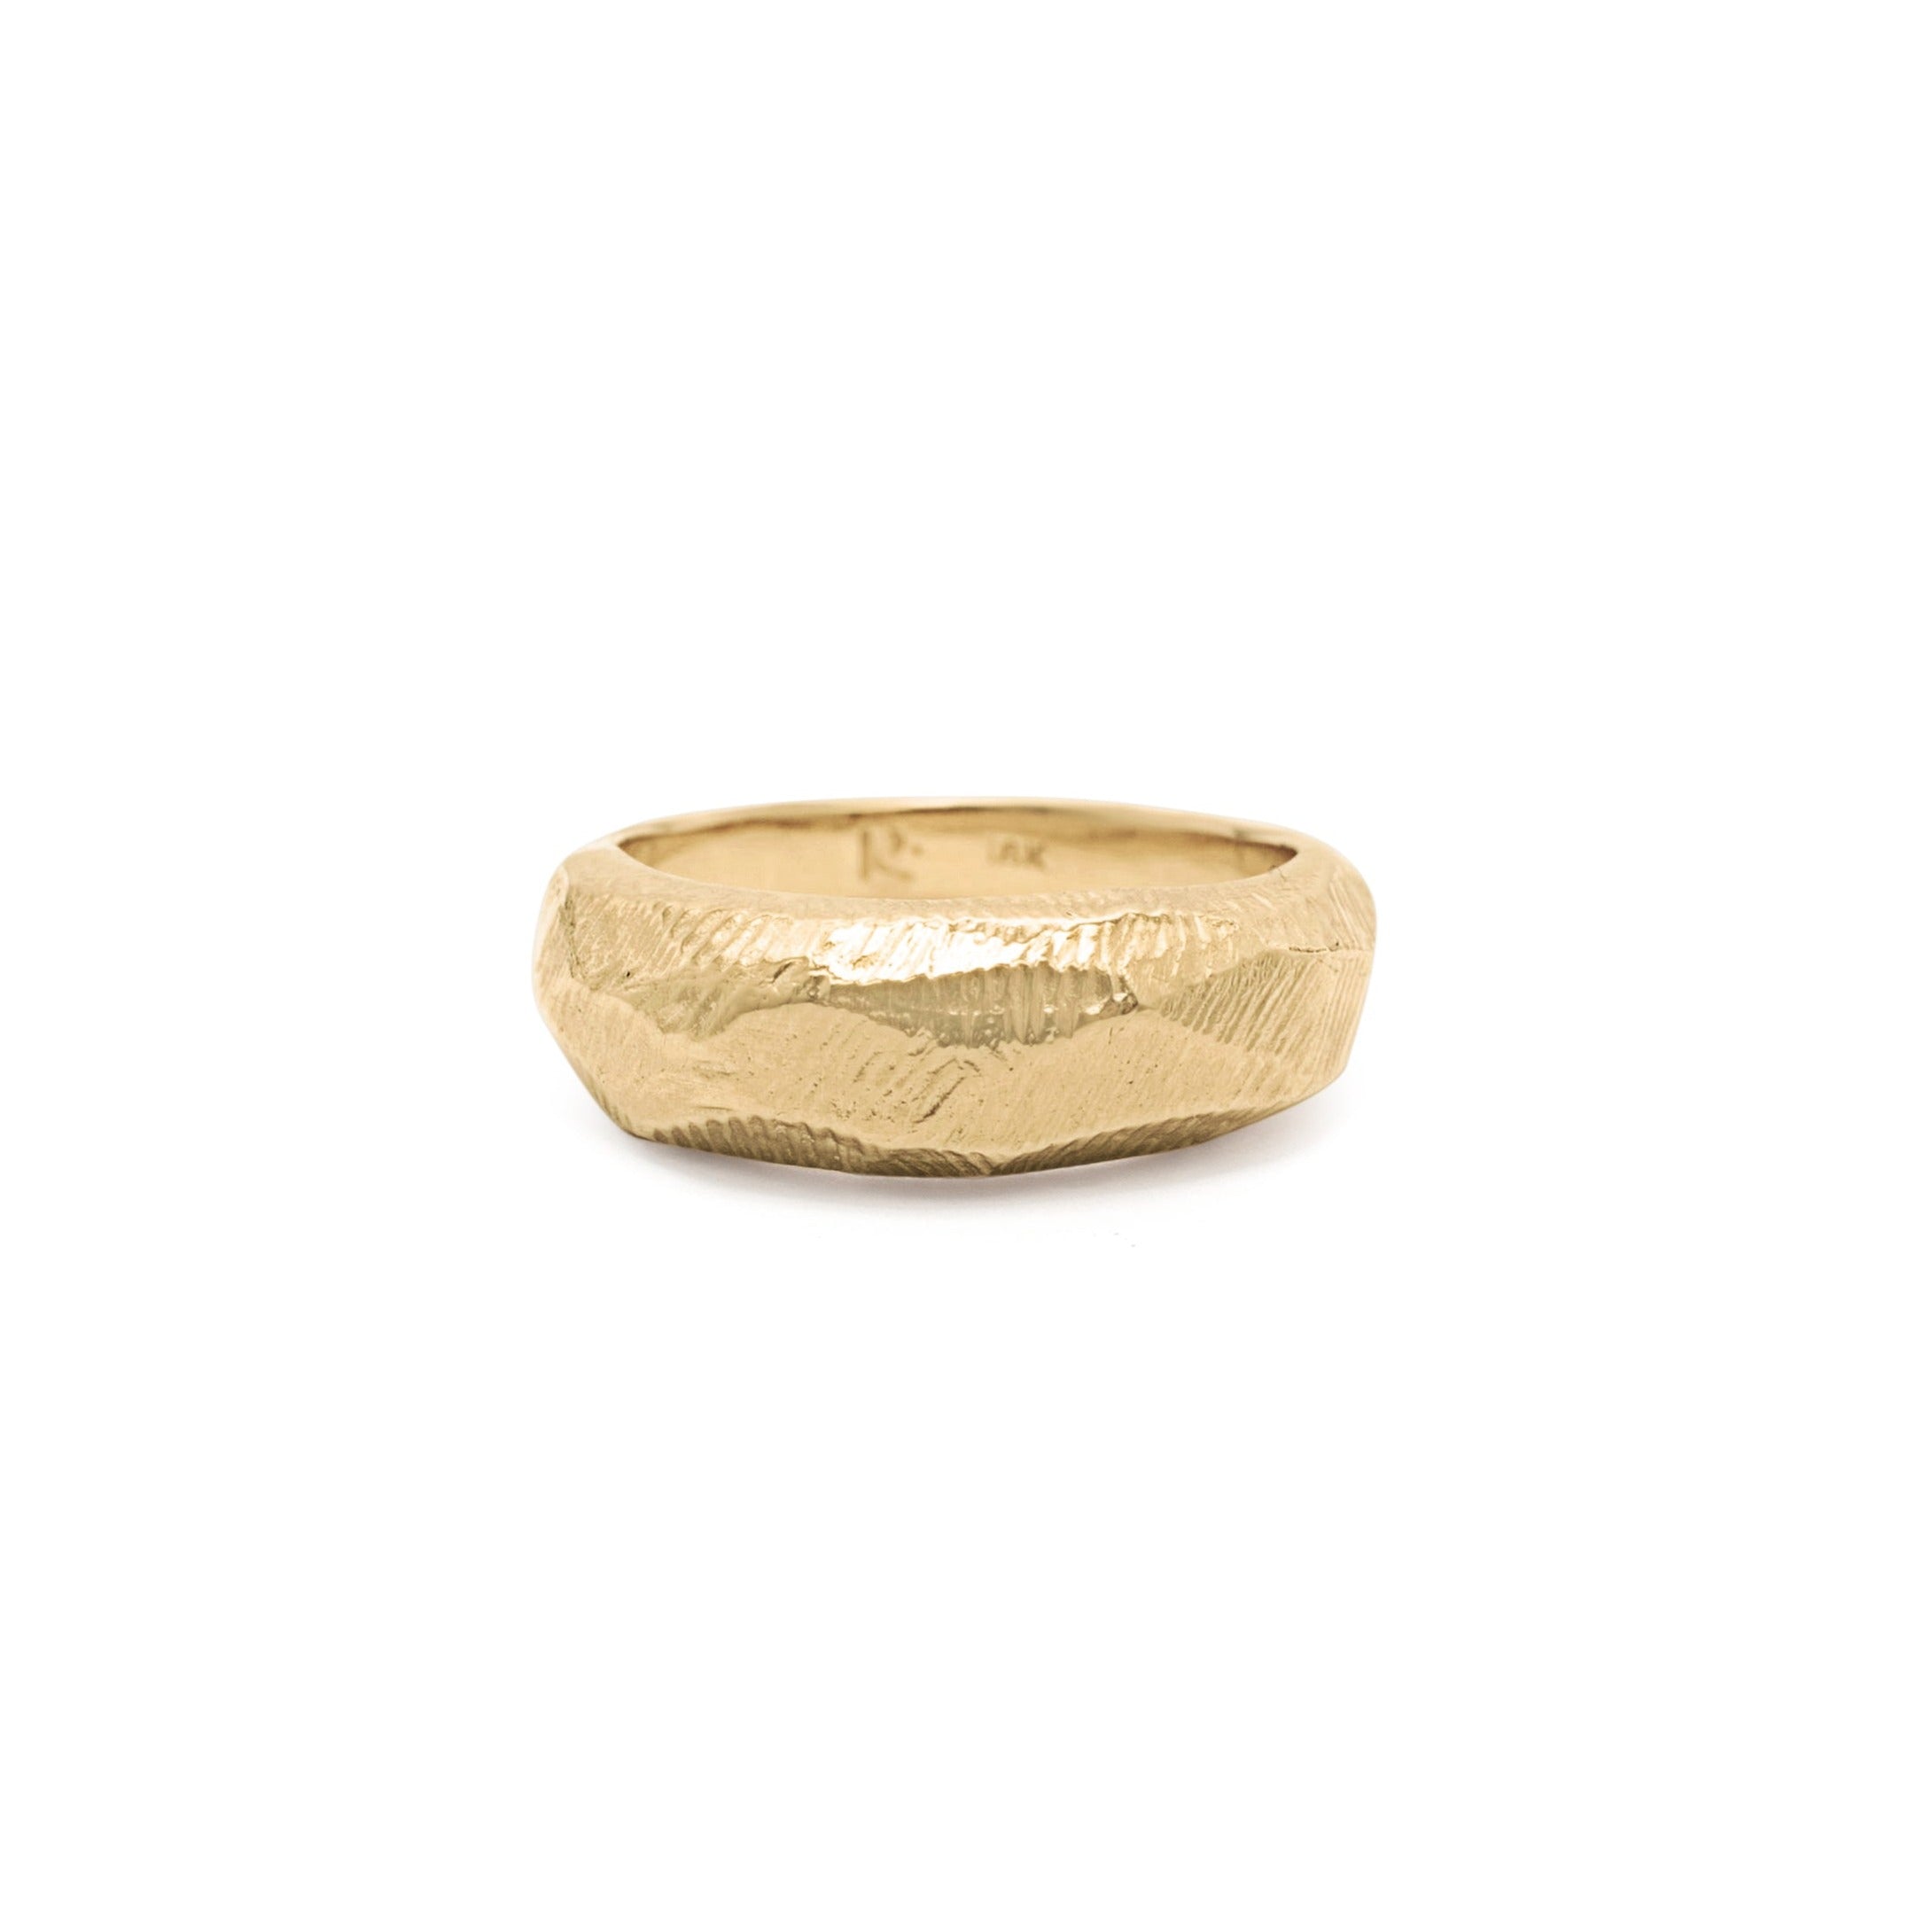 Handmade domed ring in 18kt gold made in Brooklyn